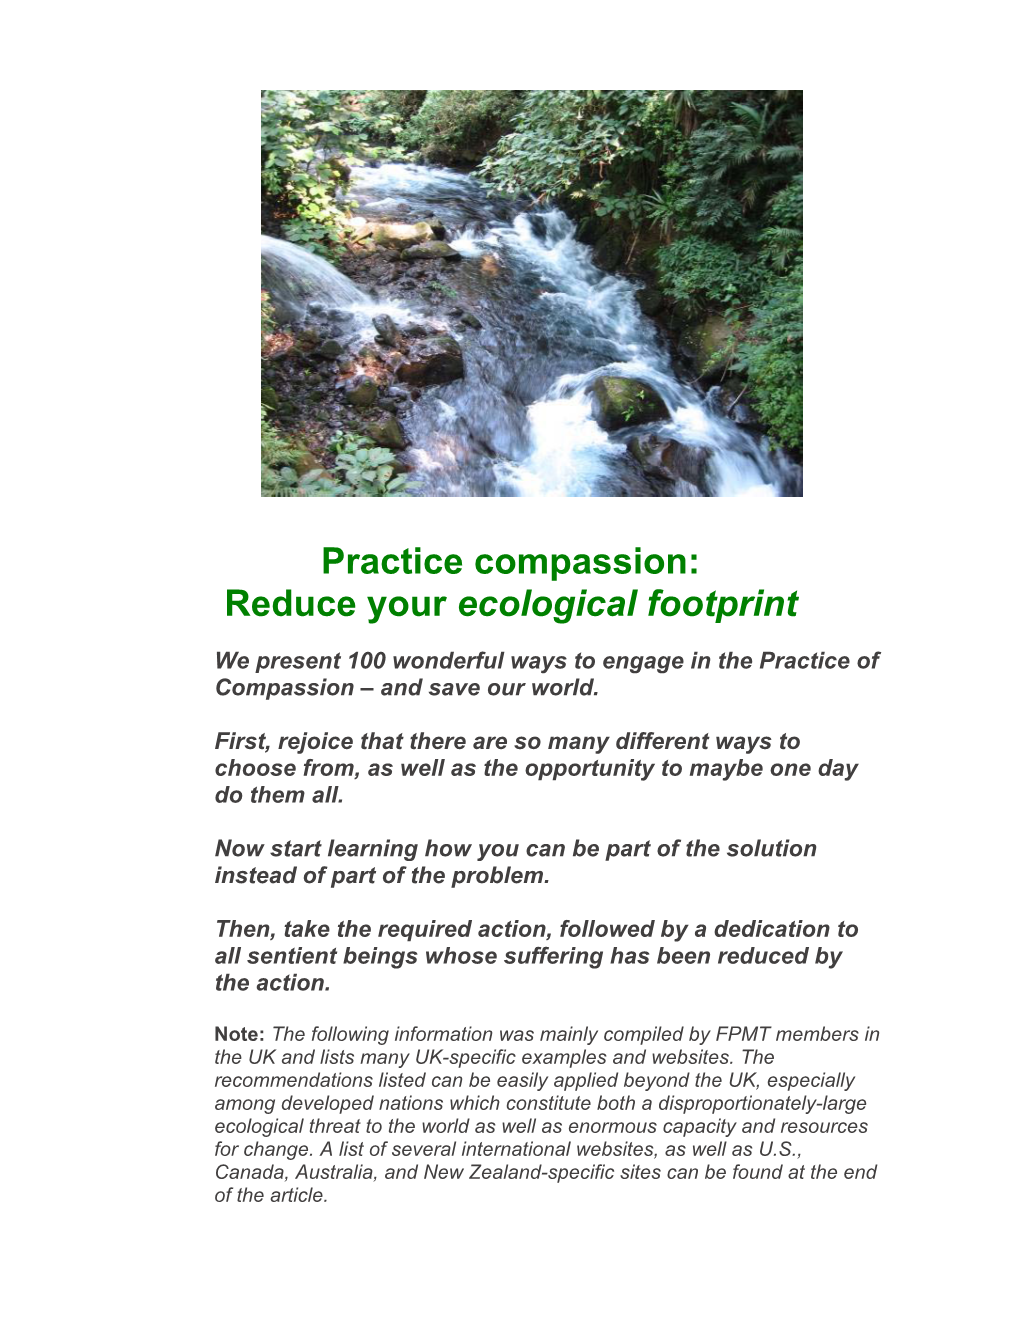 Reduce Your Ecological Footprint